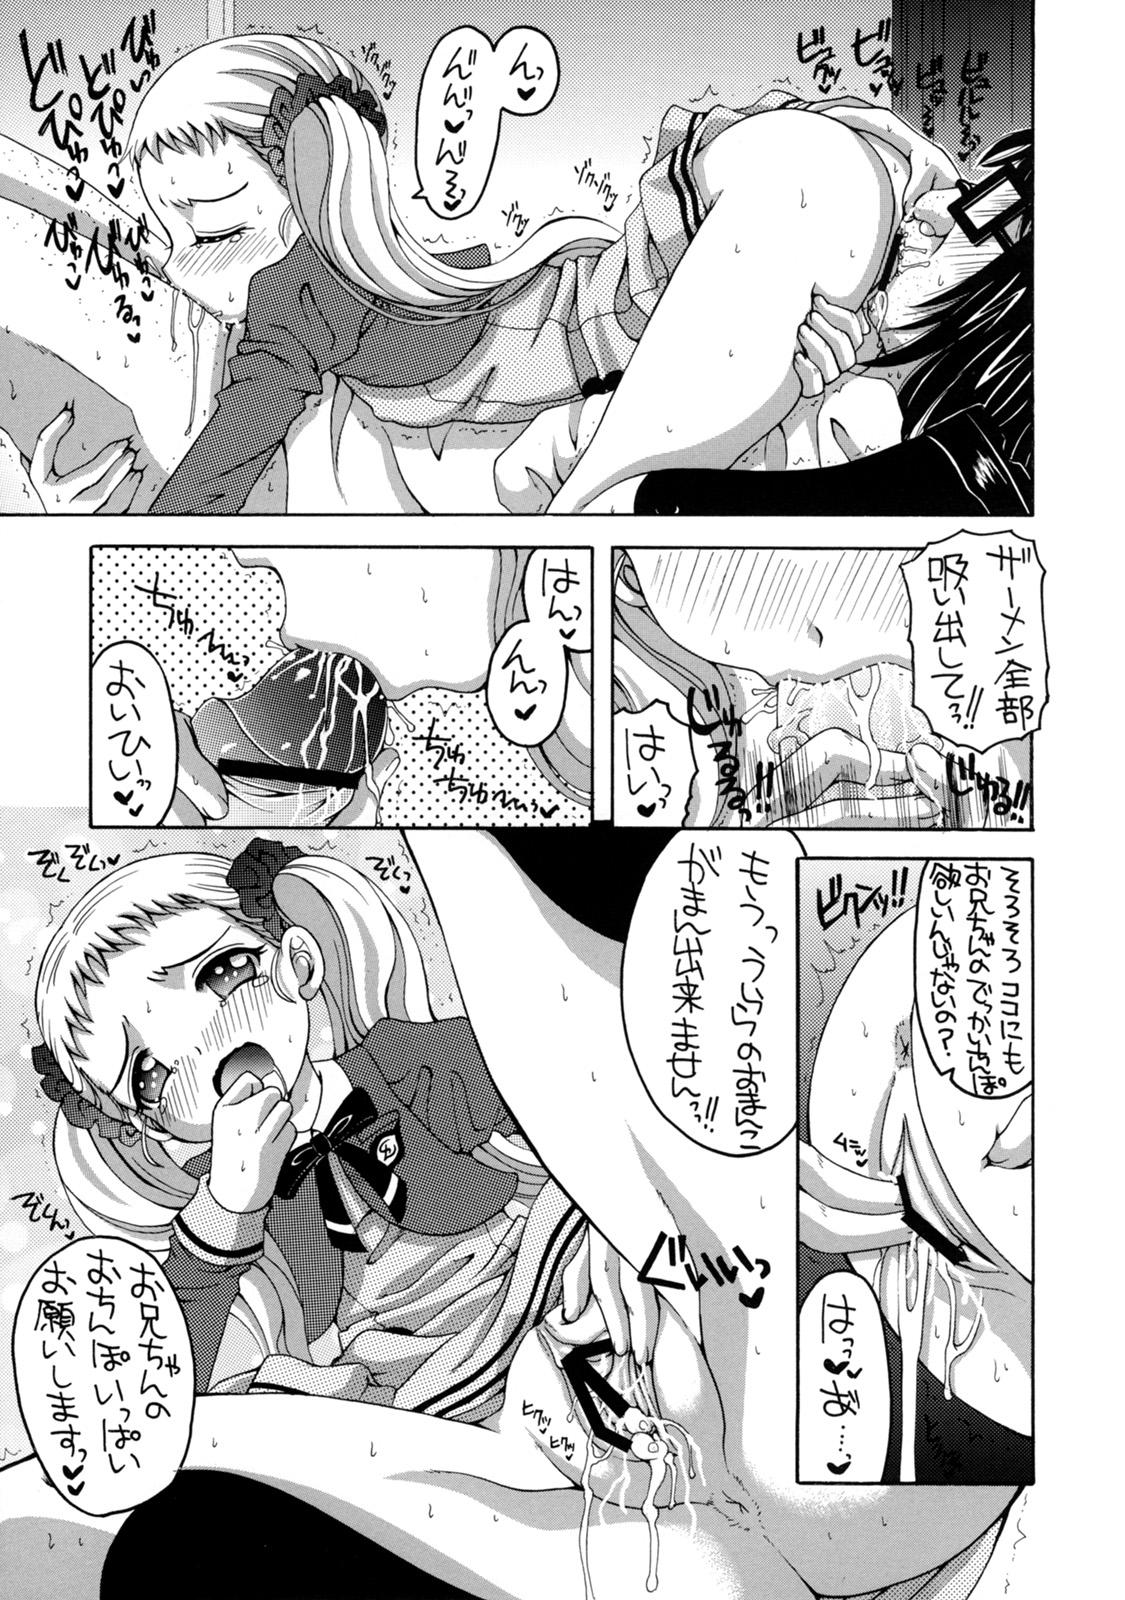 Chaturbate Yes! Five 3 - Pretty cure Yes precure 5 Master - Page 8